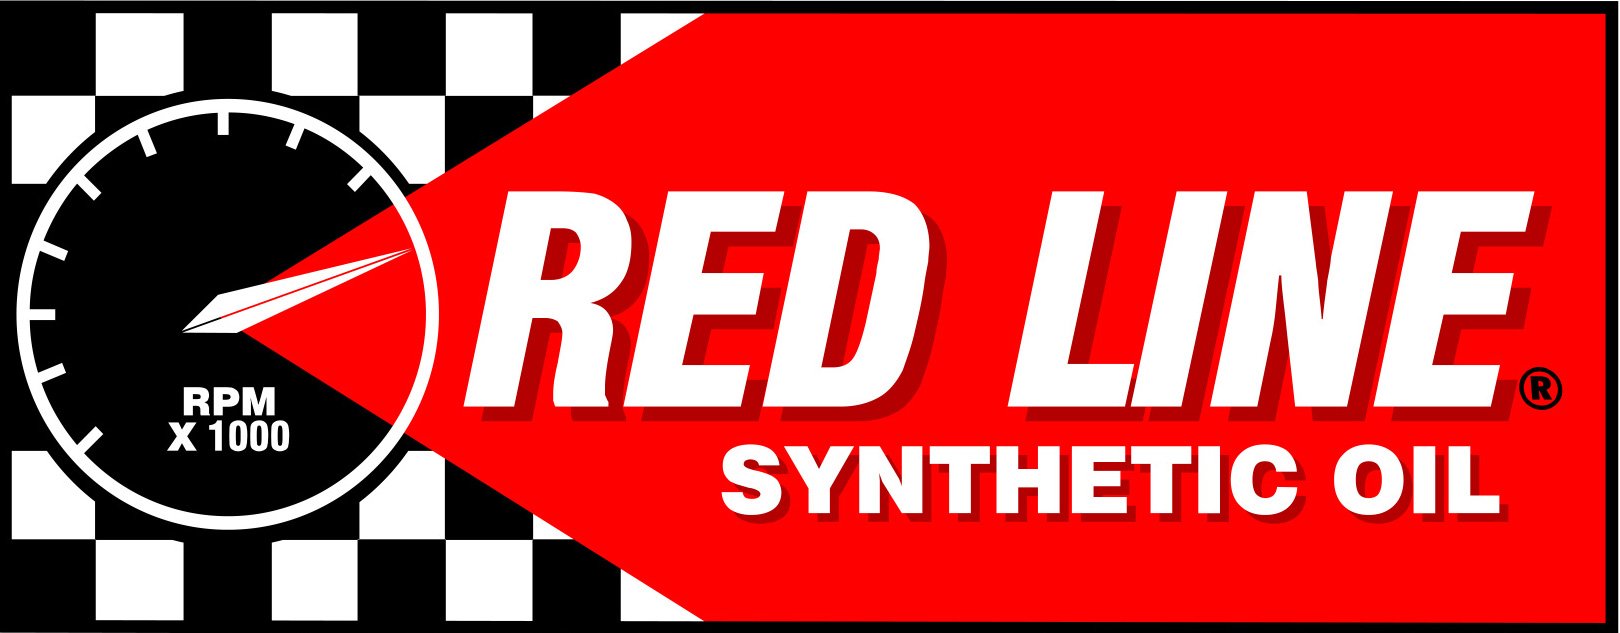 Solo Performance Specialties Red Line Oil Medium, 7 3-4" x 4", Printed, Black and Red on White